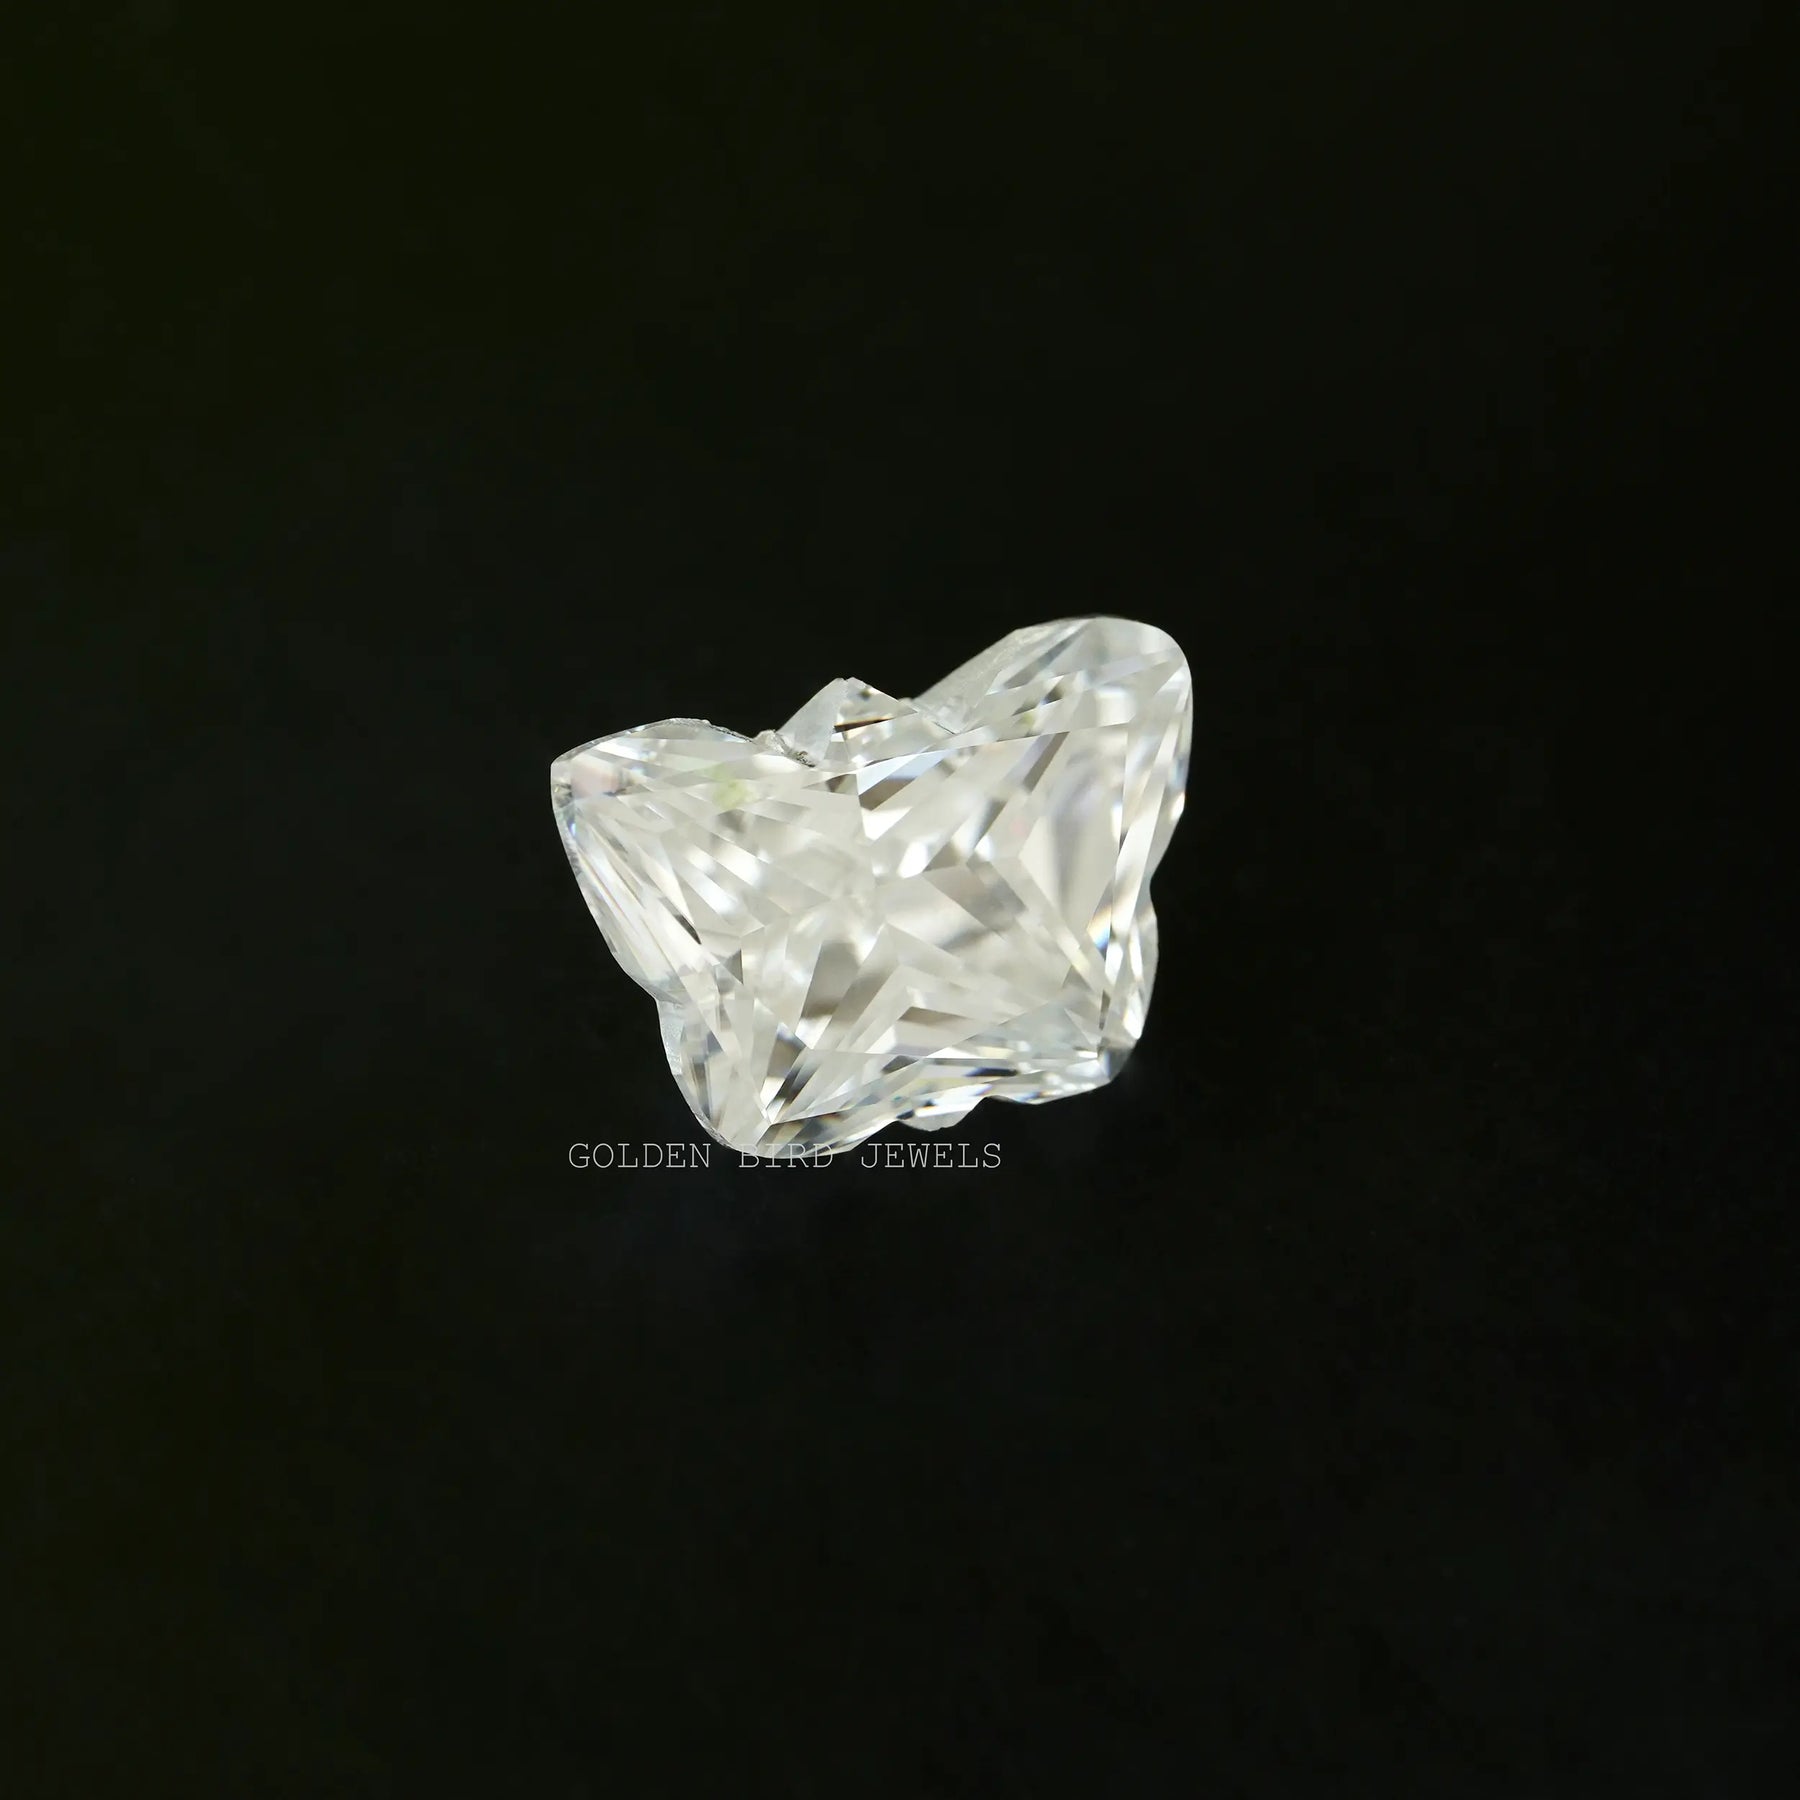 2 CT Butterfly cut moissanite gem loose stone